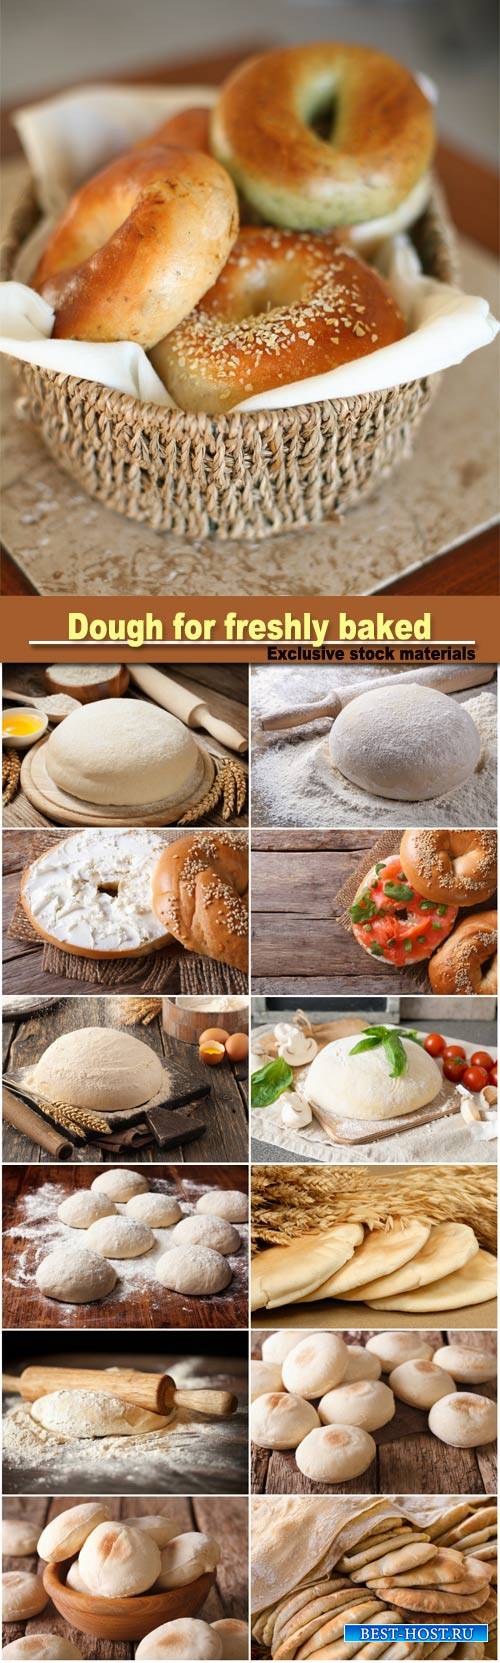 Dough for freshly baked pastries